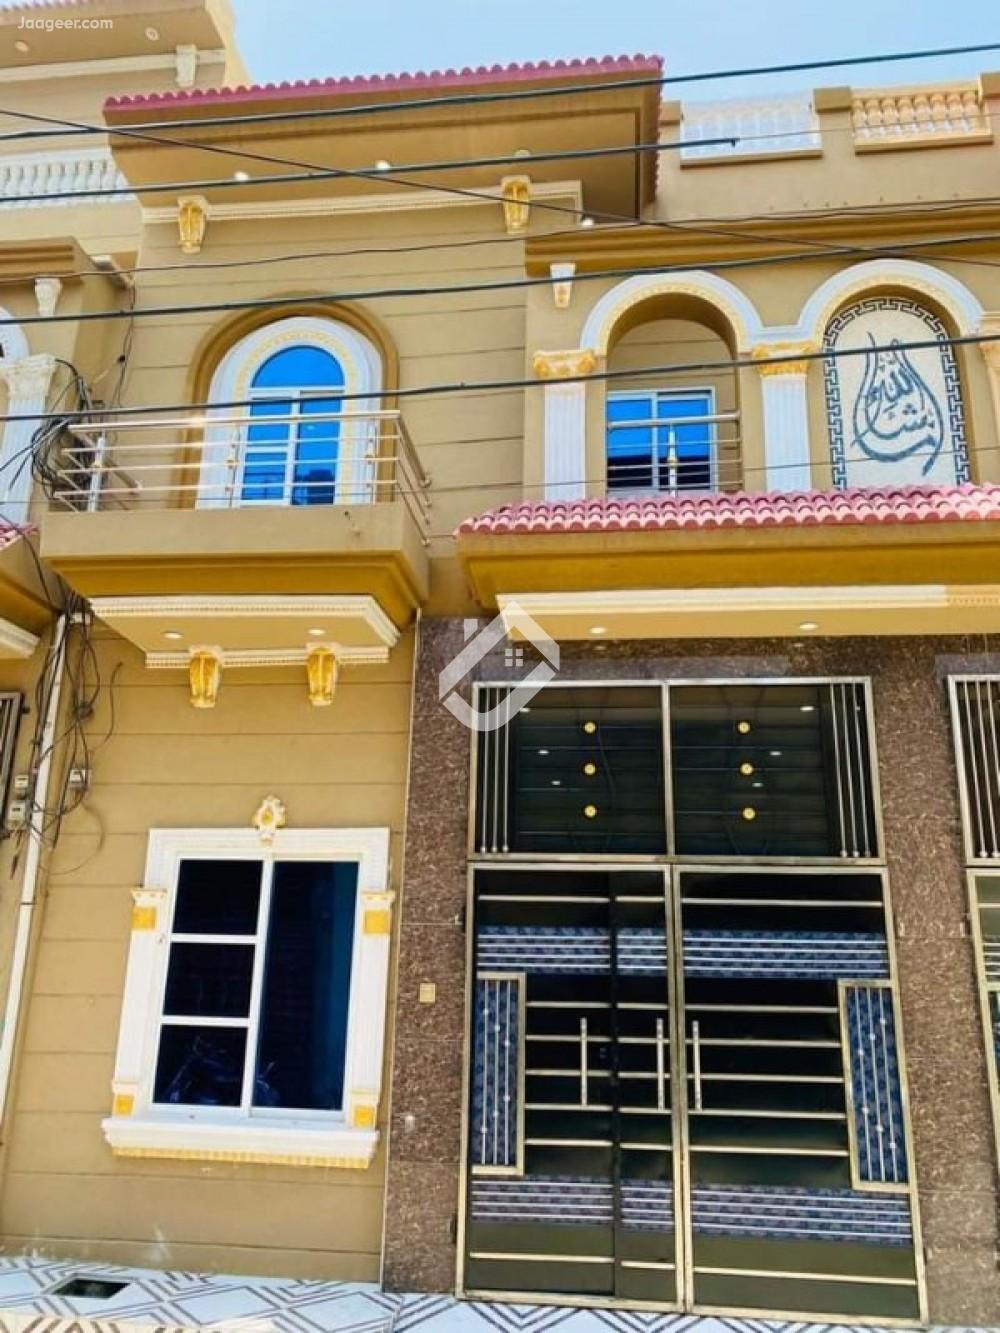 Main image 3 Marla Double Storey House For Sale In Hamza Town Phase-2 Phase-2